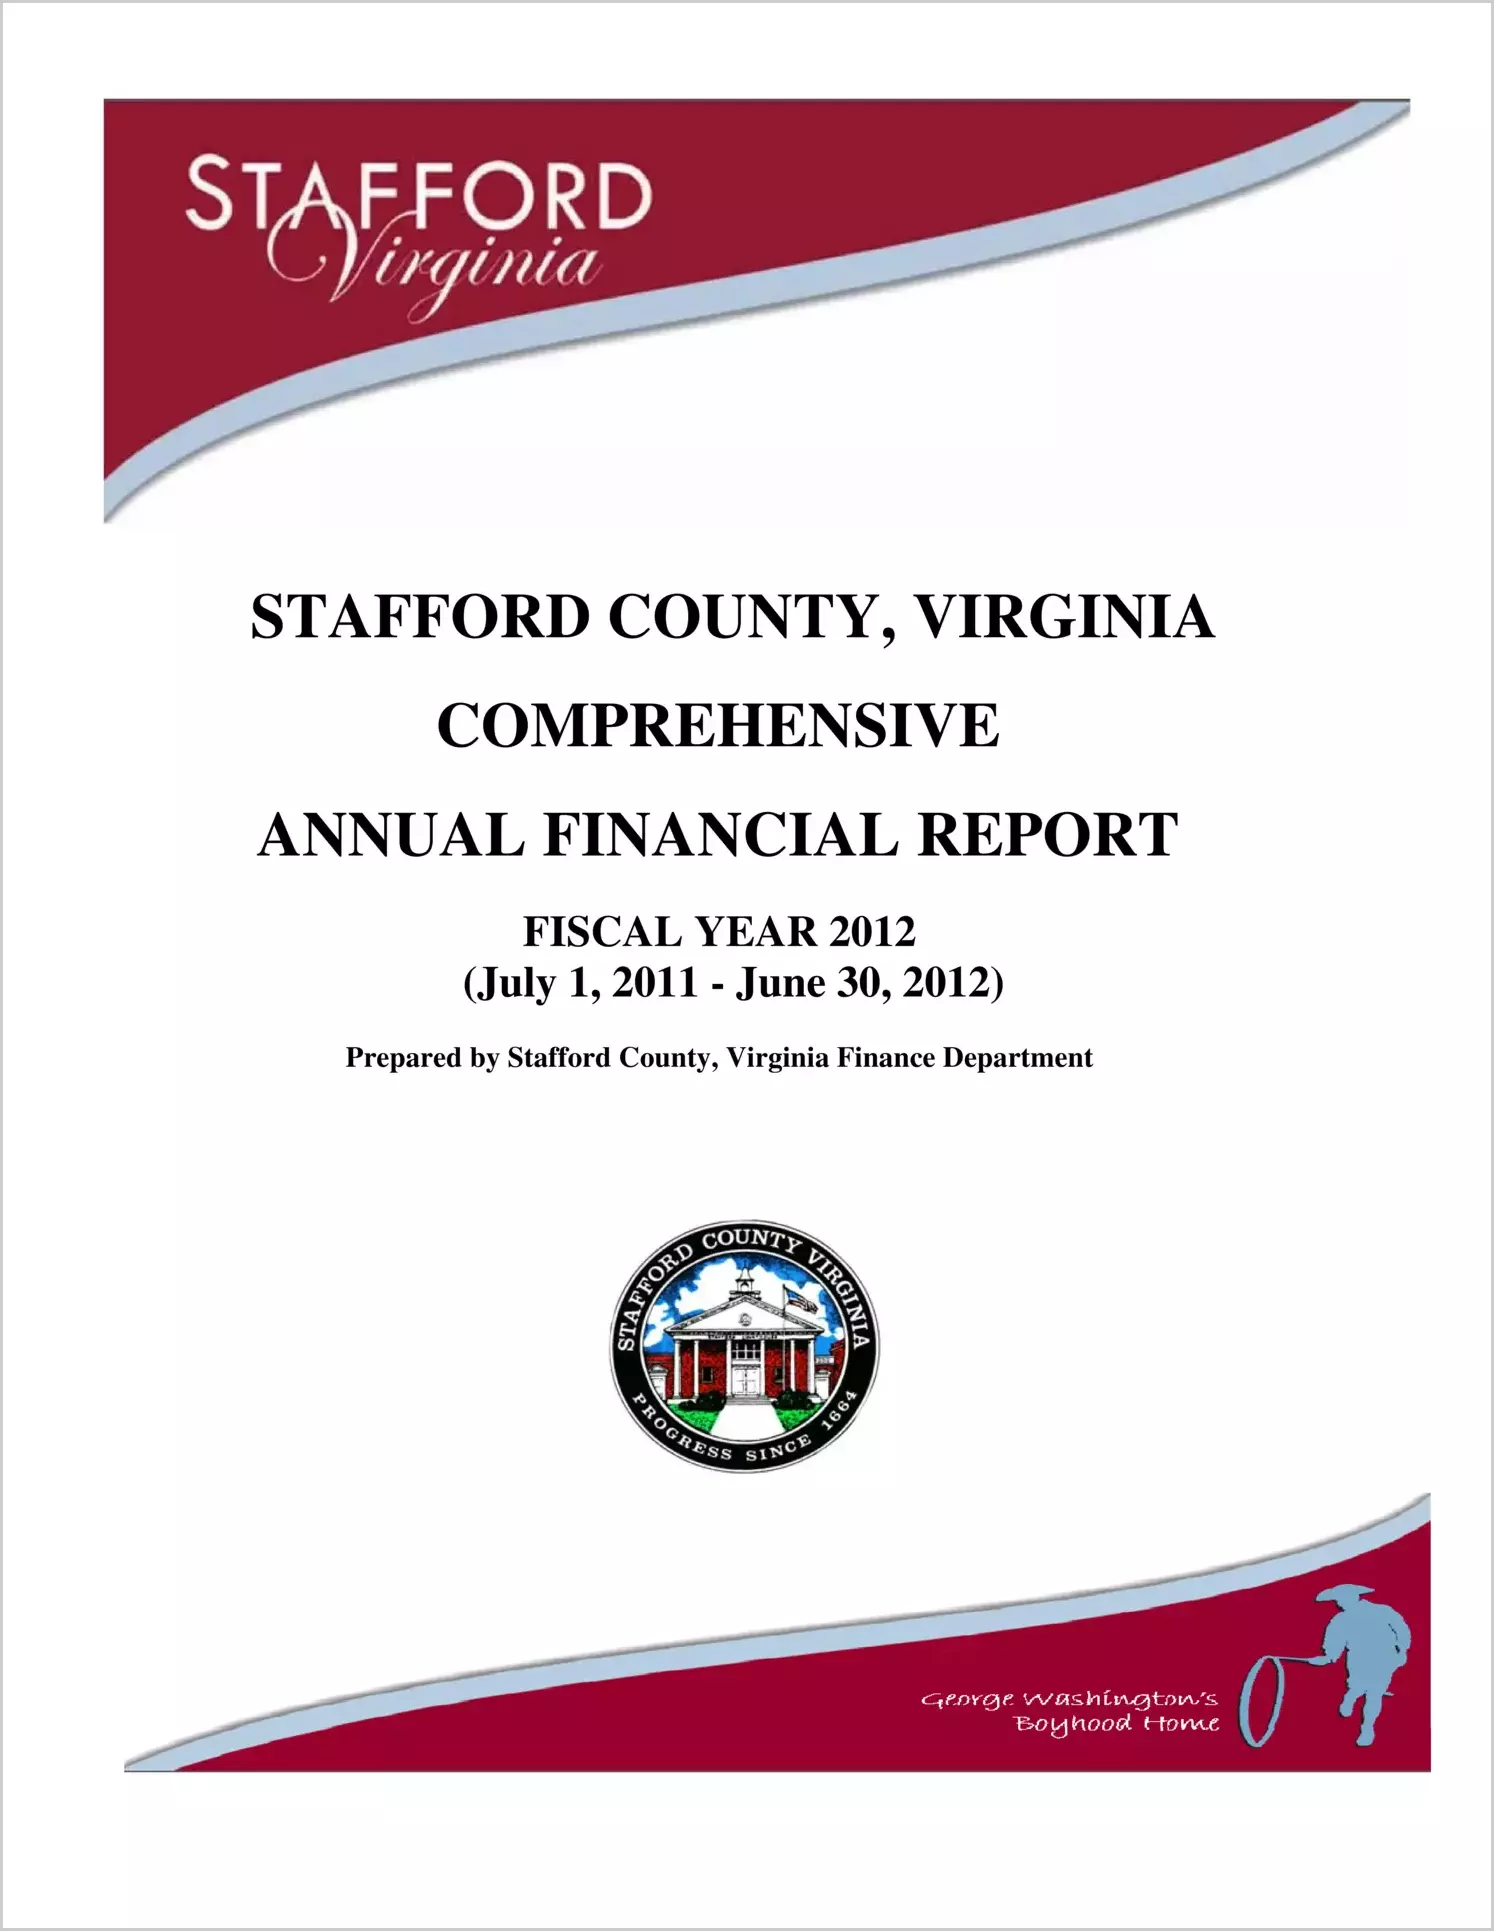 2012 Annual Financial Report for County of Stafford